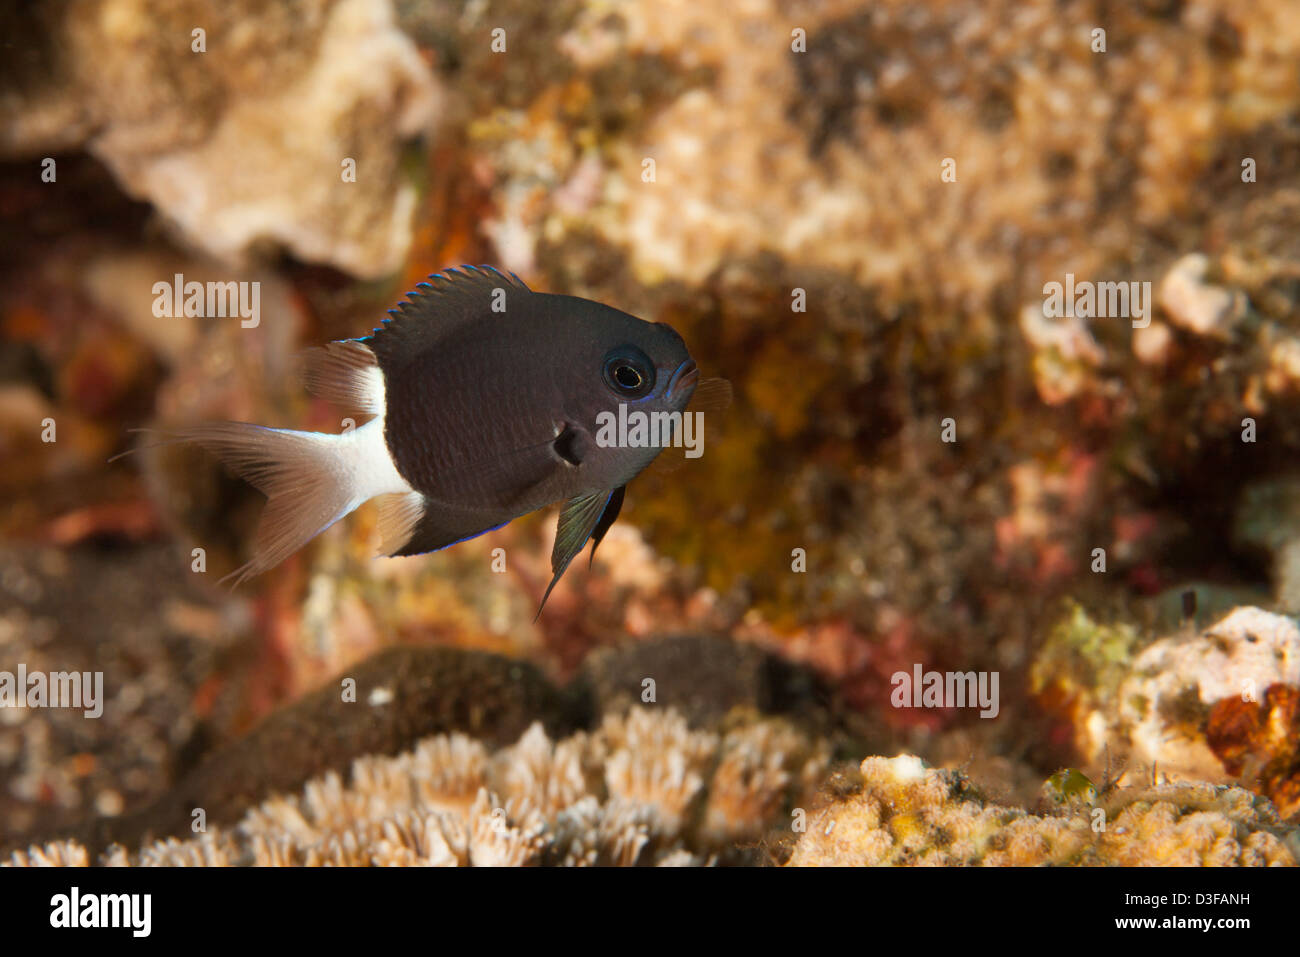 Bicolor Chromis (Chromis margaritifer) on a tropical coral reef in Bali, Indonesia. Stock Photo